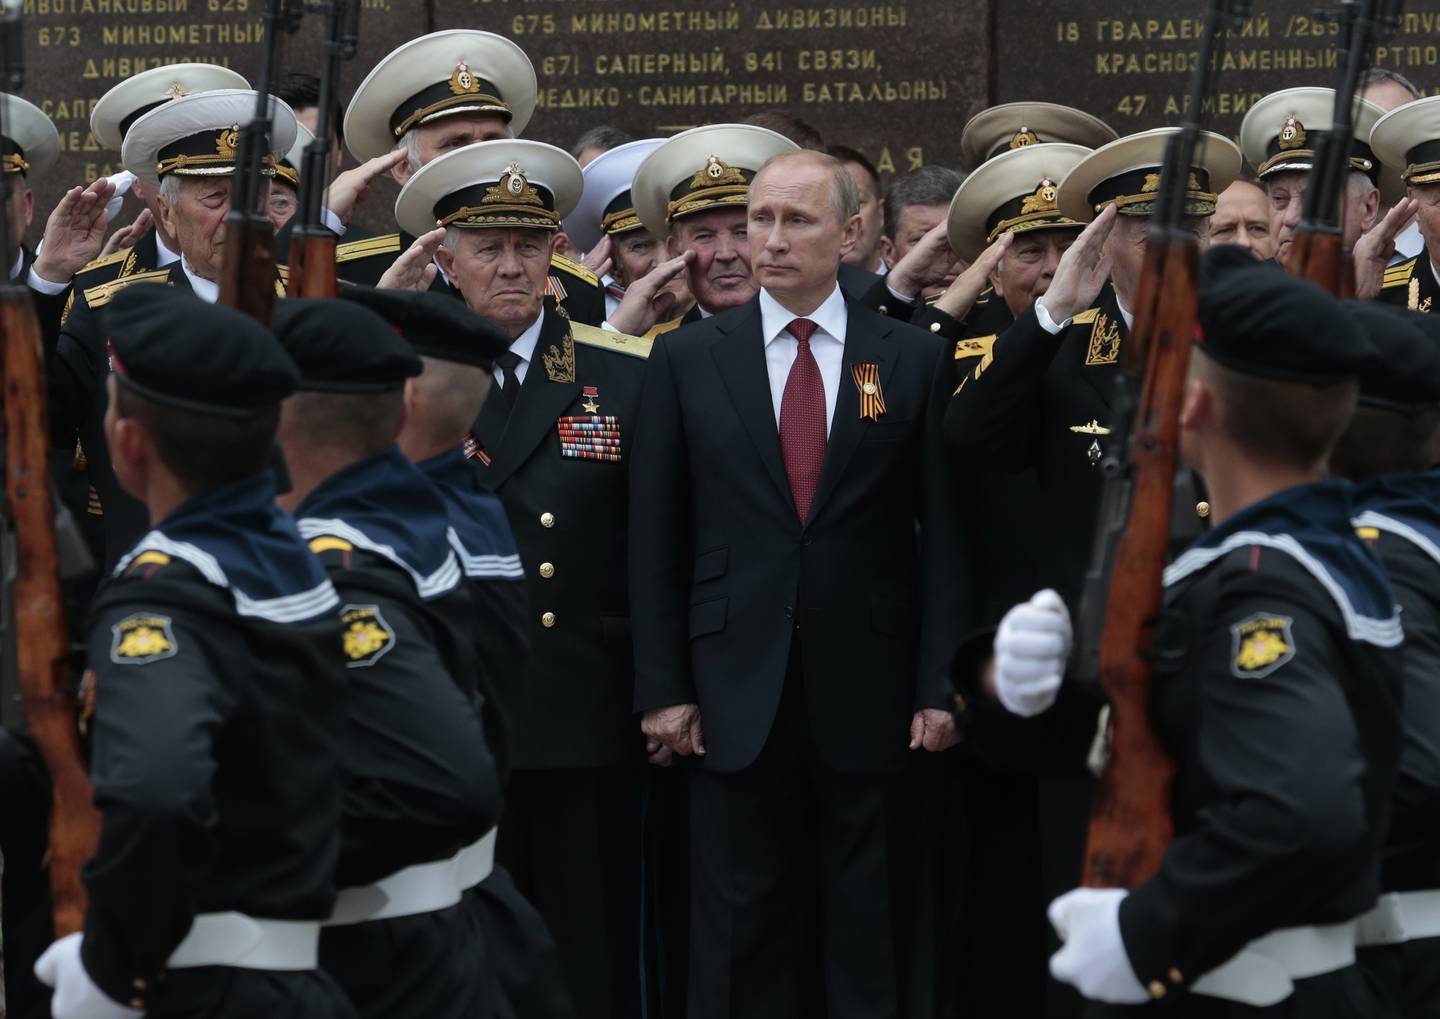 Vladimir Putin marked Victory Day in Sevastopol, Crimea, in 2014 after Russia annexed the peninsula. AP 